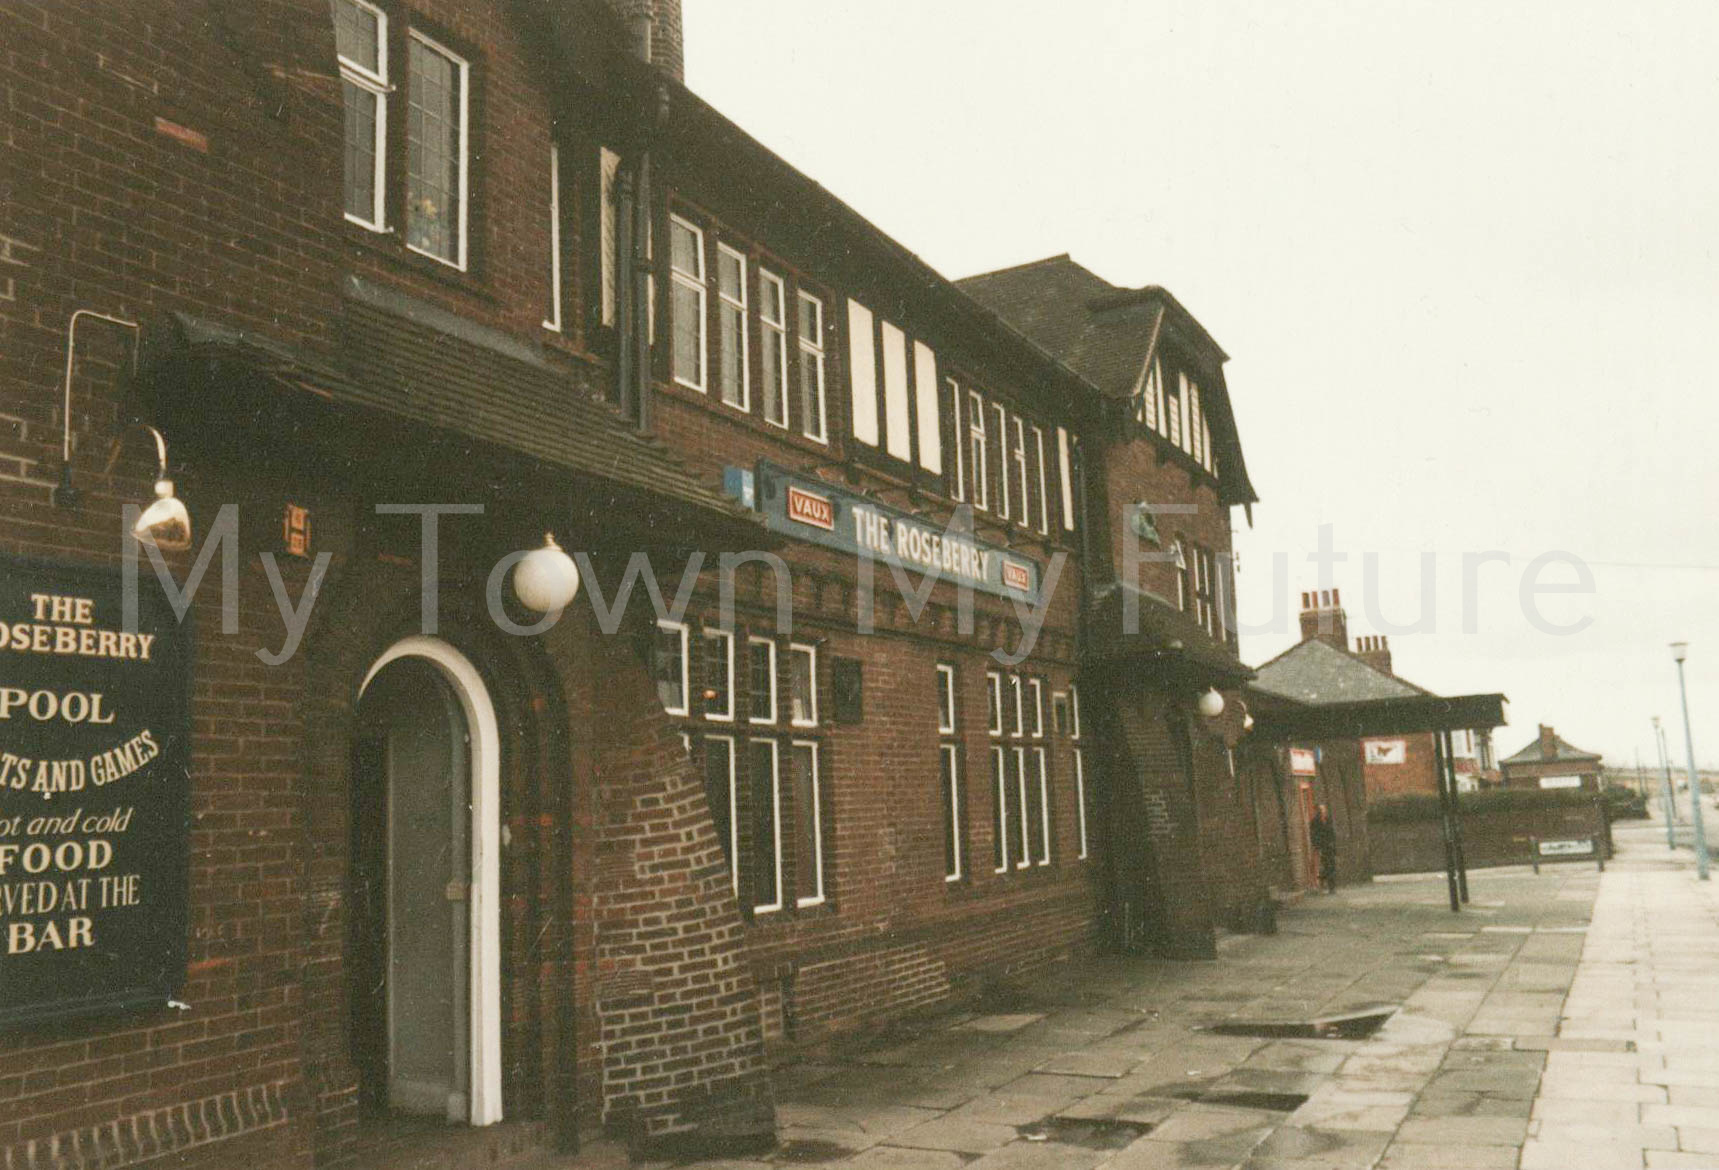 The Roseberry,Acklam Road